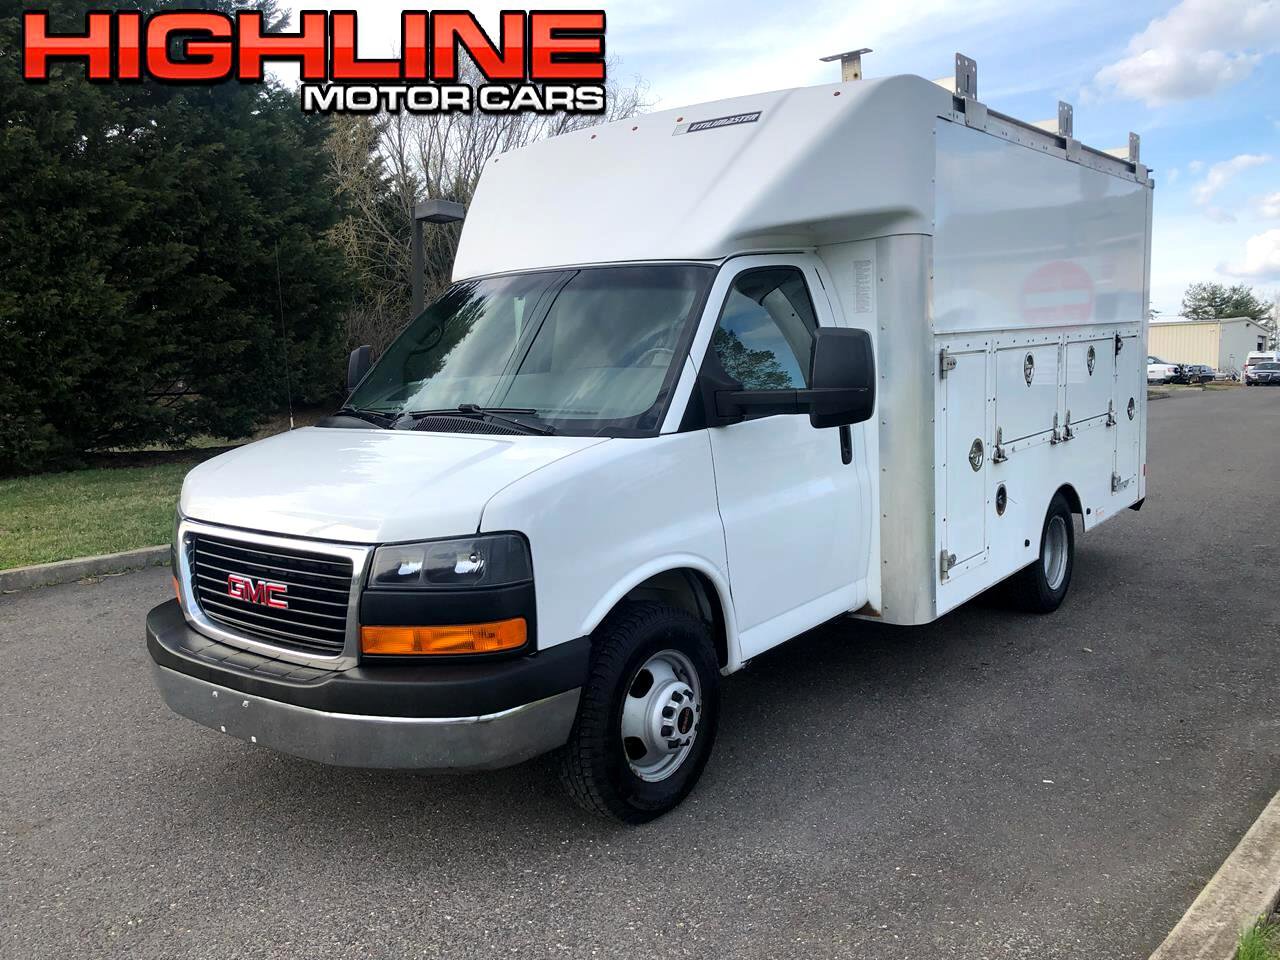 Used 2015 GMC Savana 3500 for Sale Right Now - Autotrader